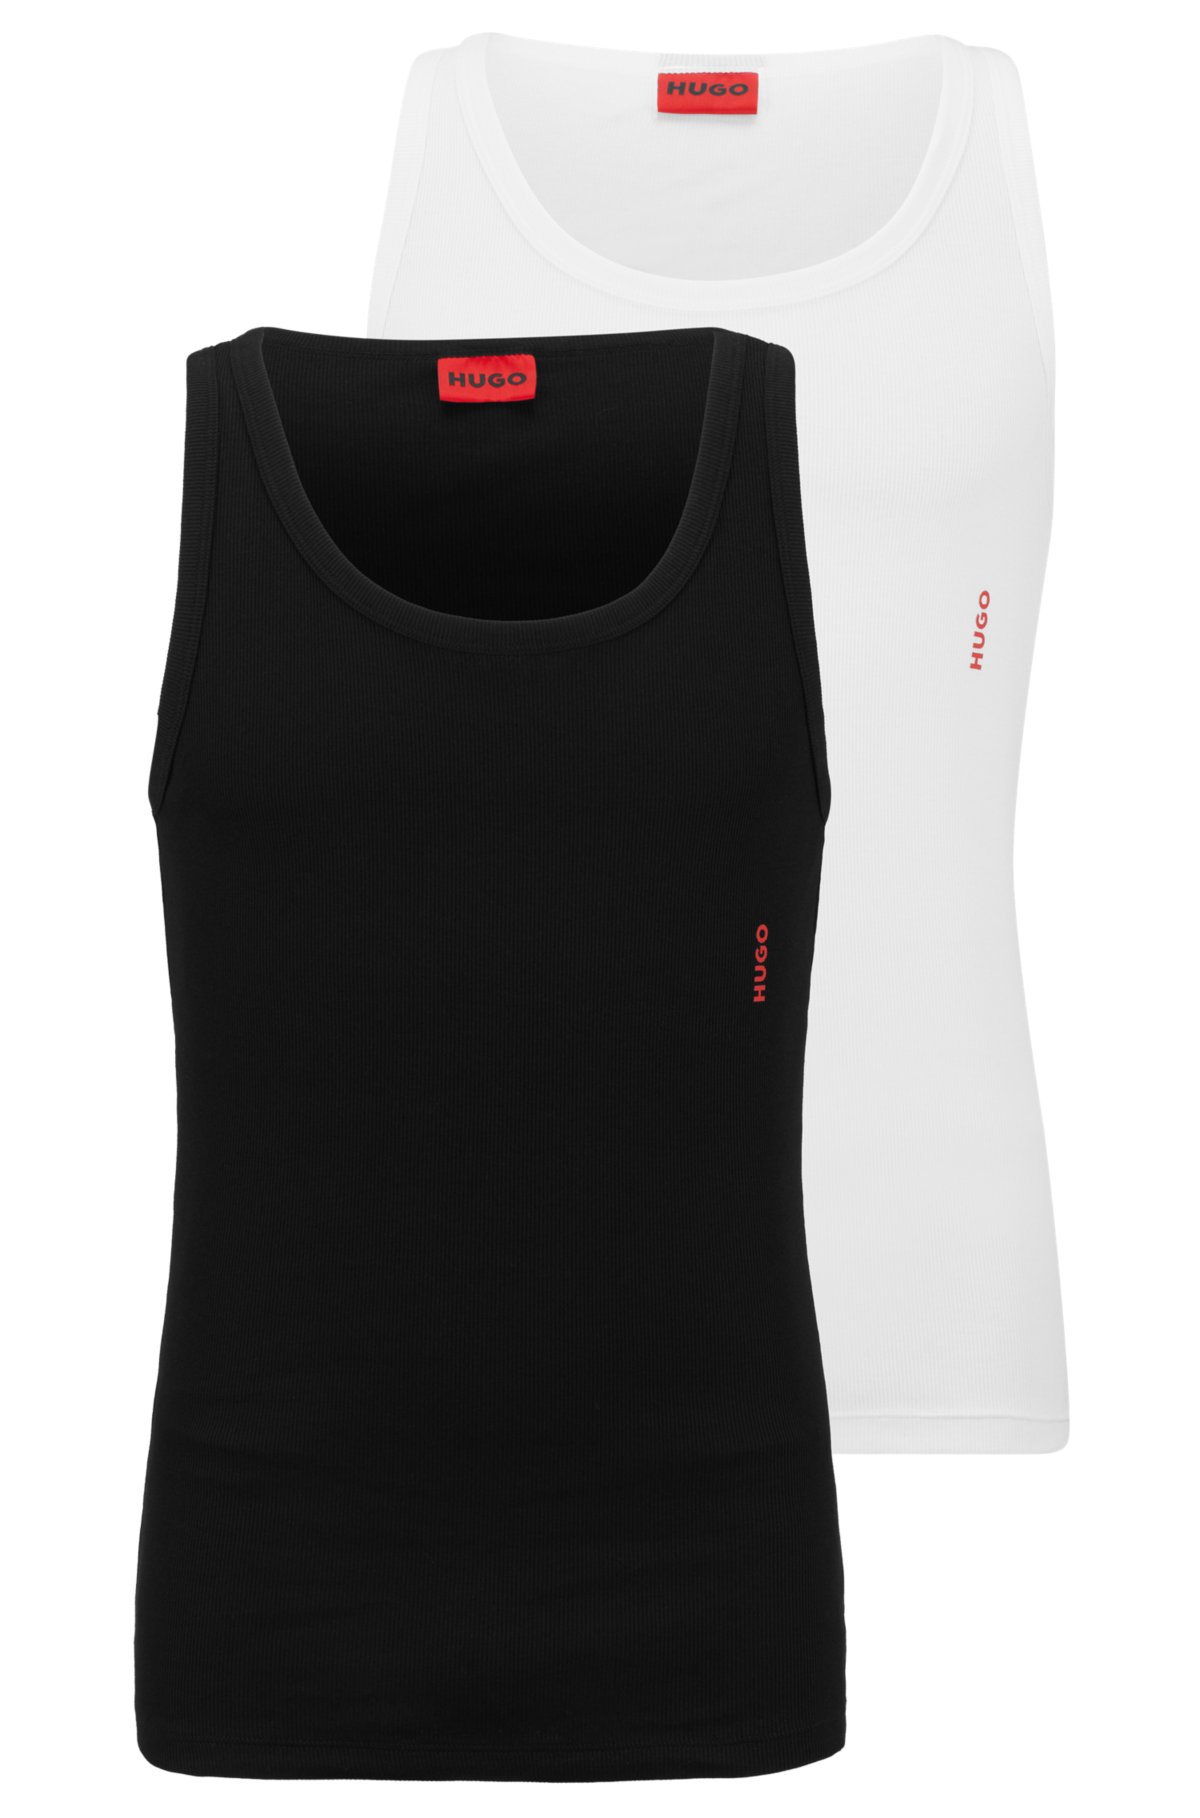 stretch-cotton tops HUGO - with Two-pack logo tank of